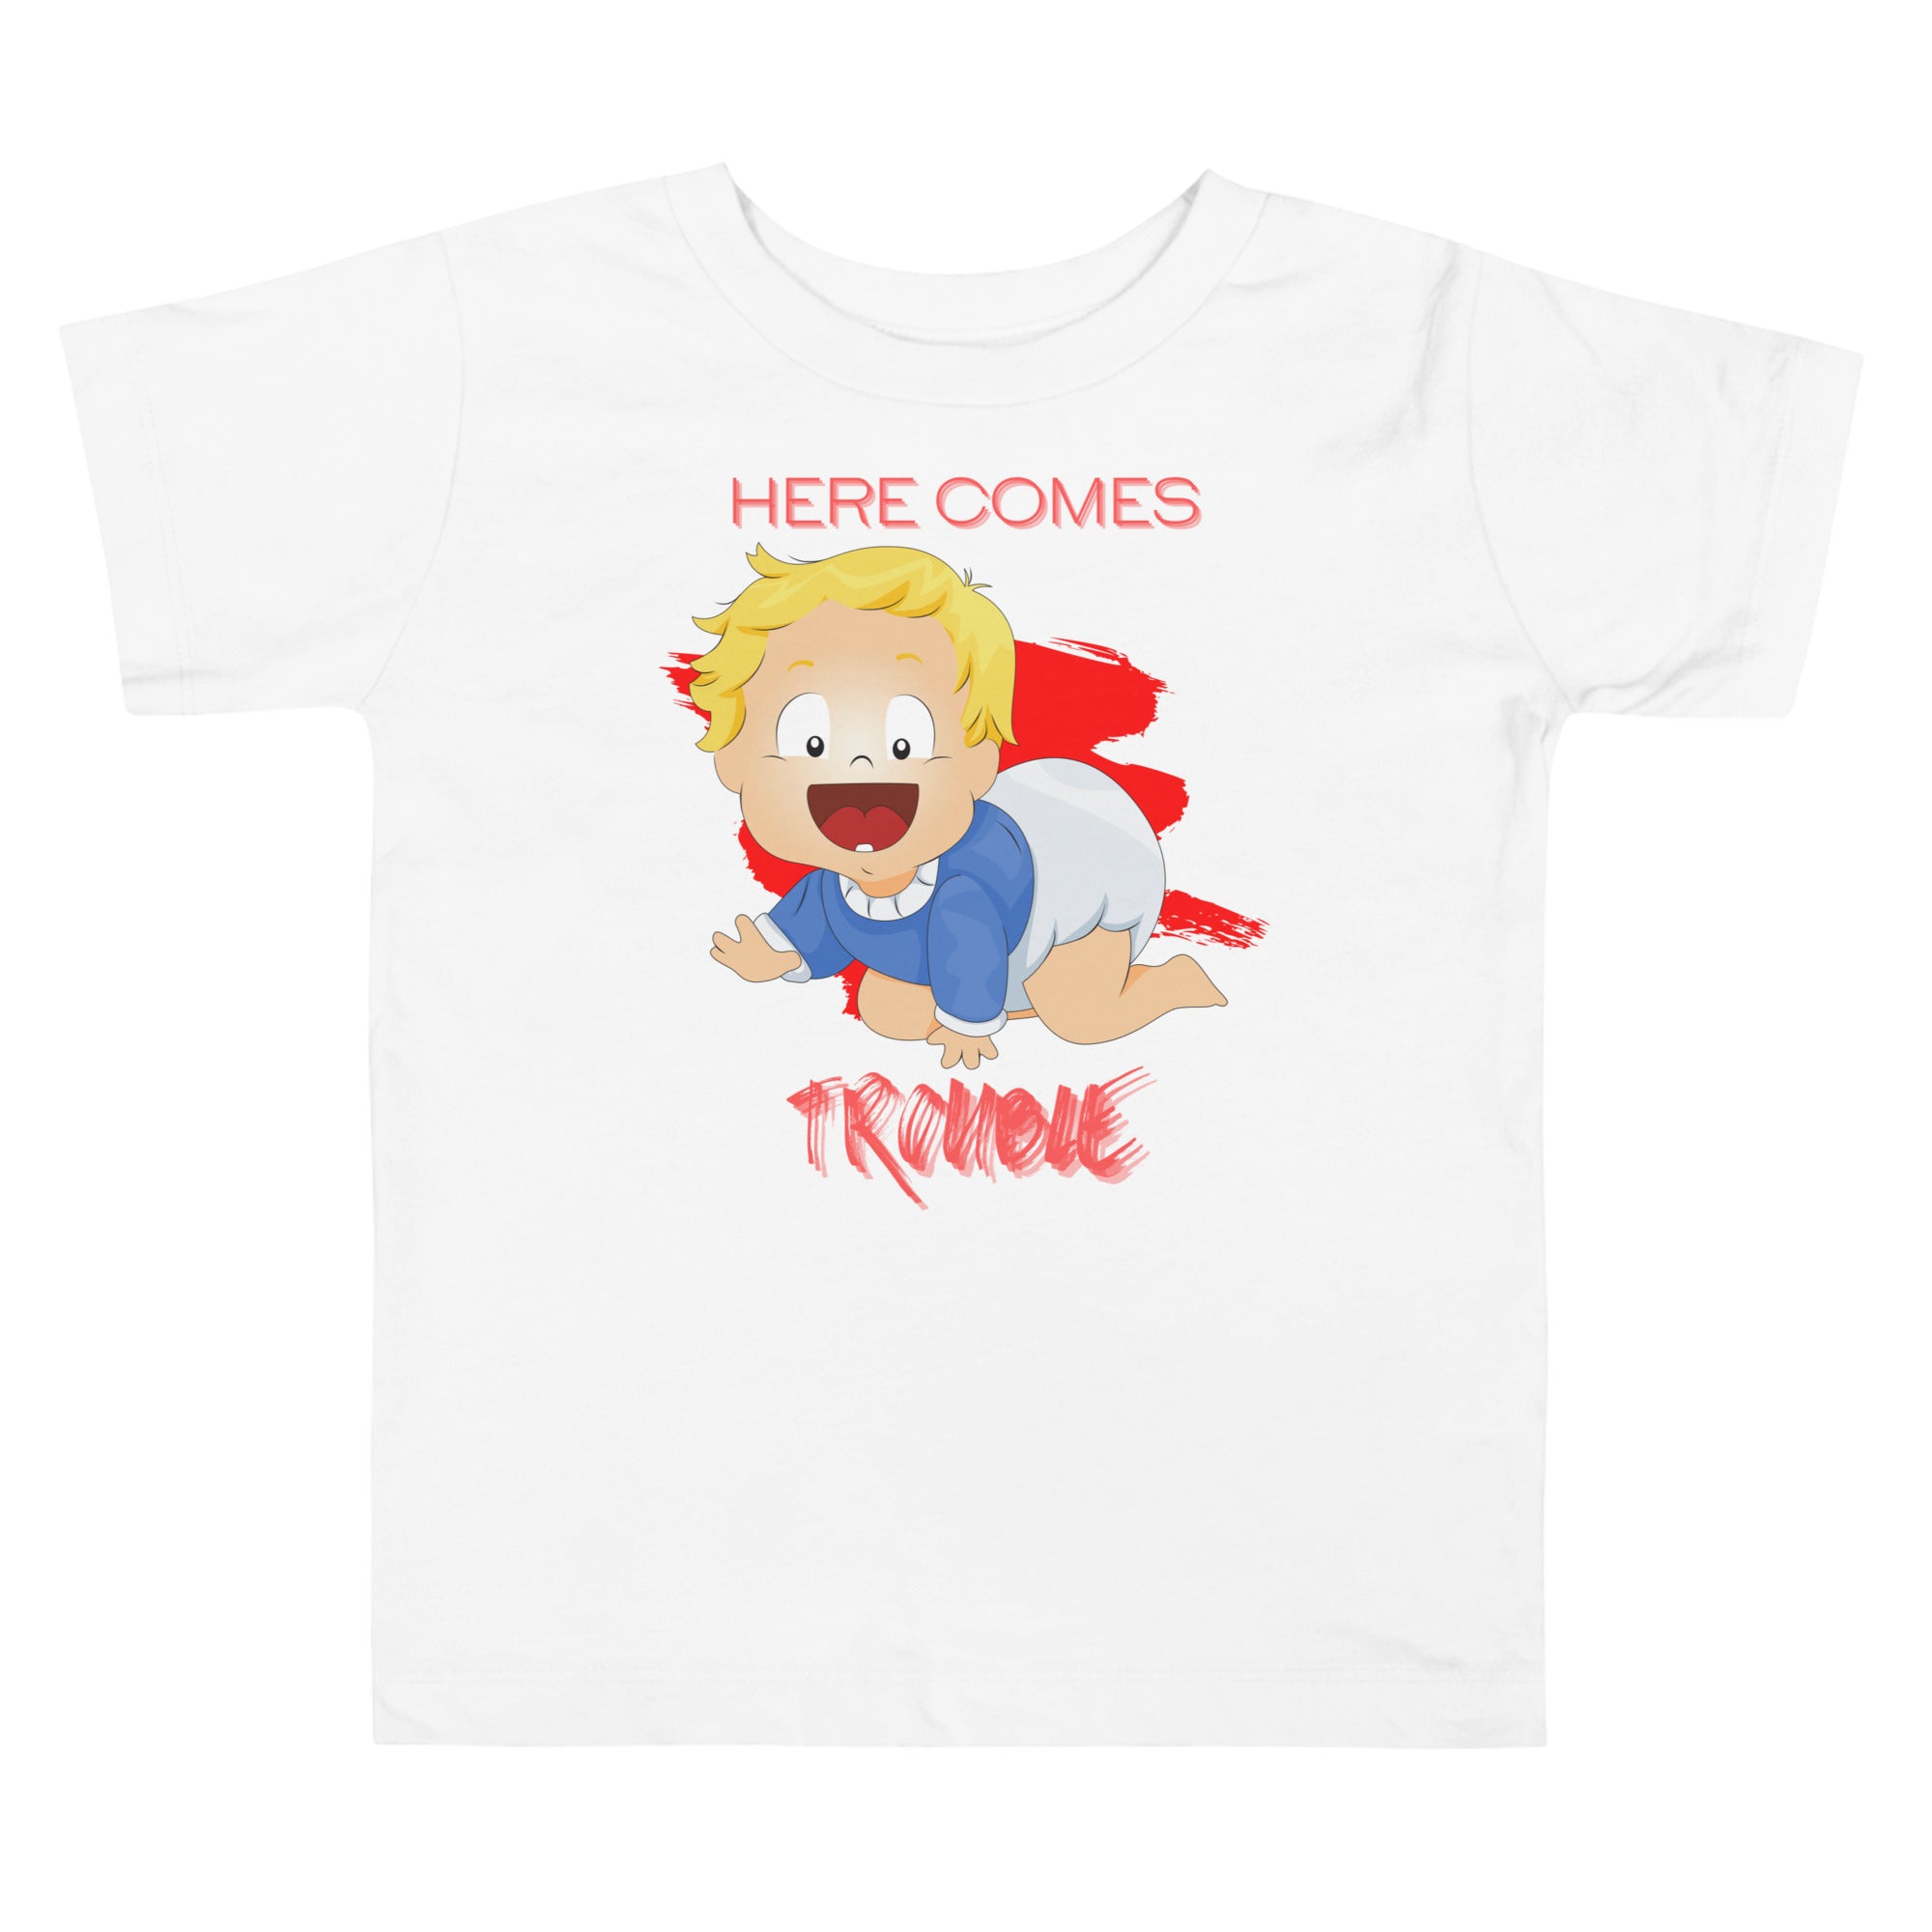 Toddler Short Sleeve Tee - Trouble (White)